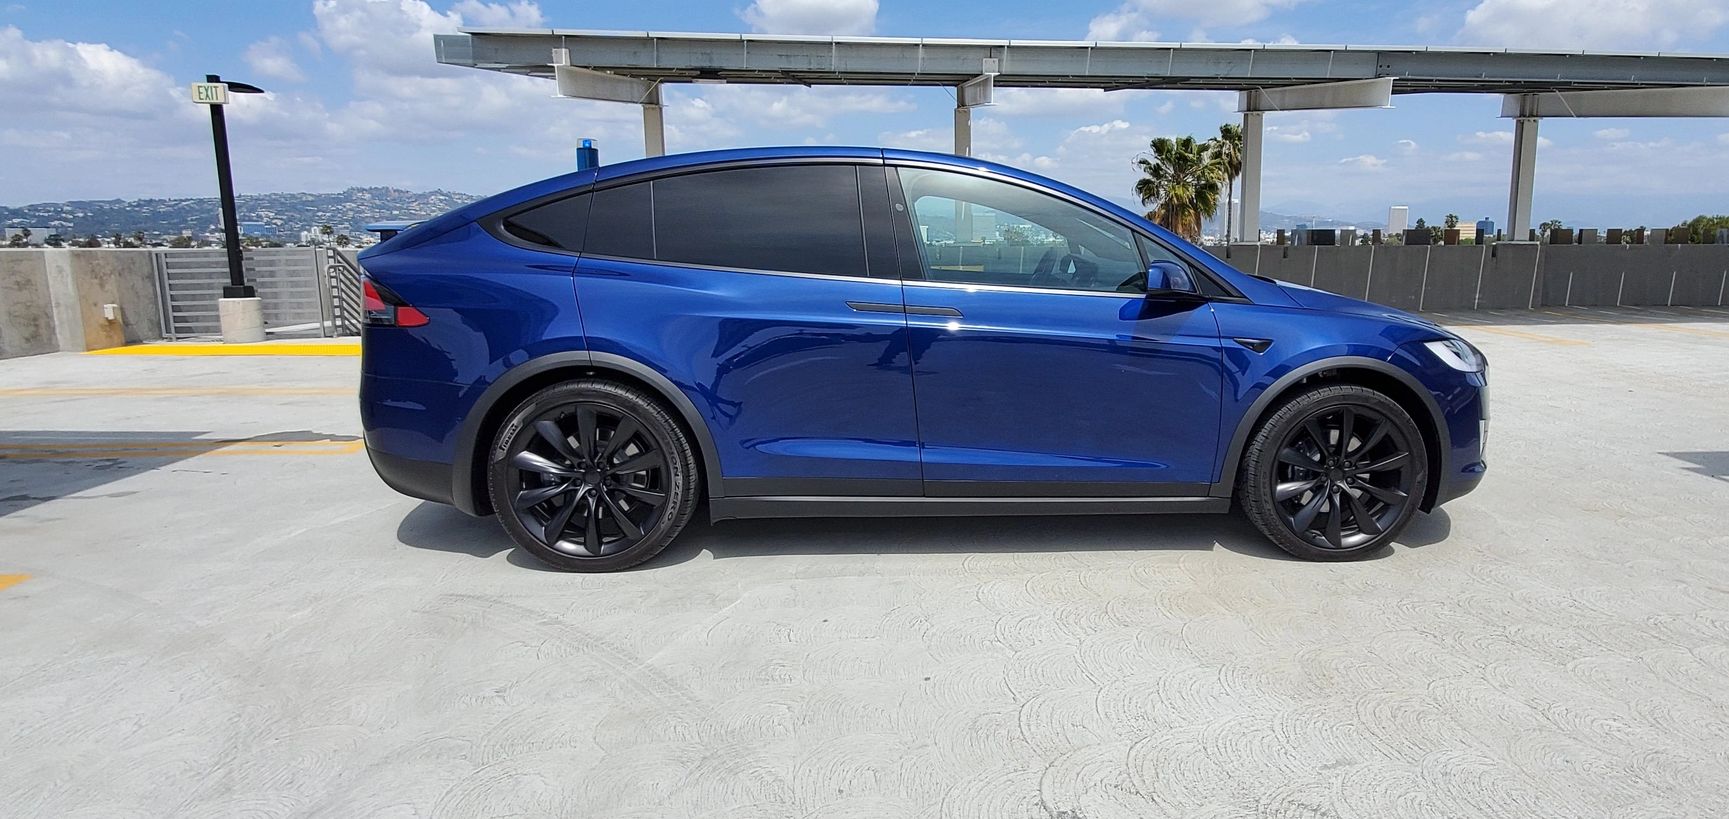 Tesla Model X full body protected with Xpel clear bra and ceramic coating.